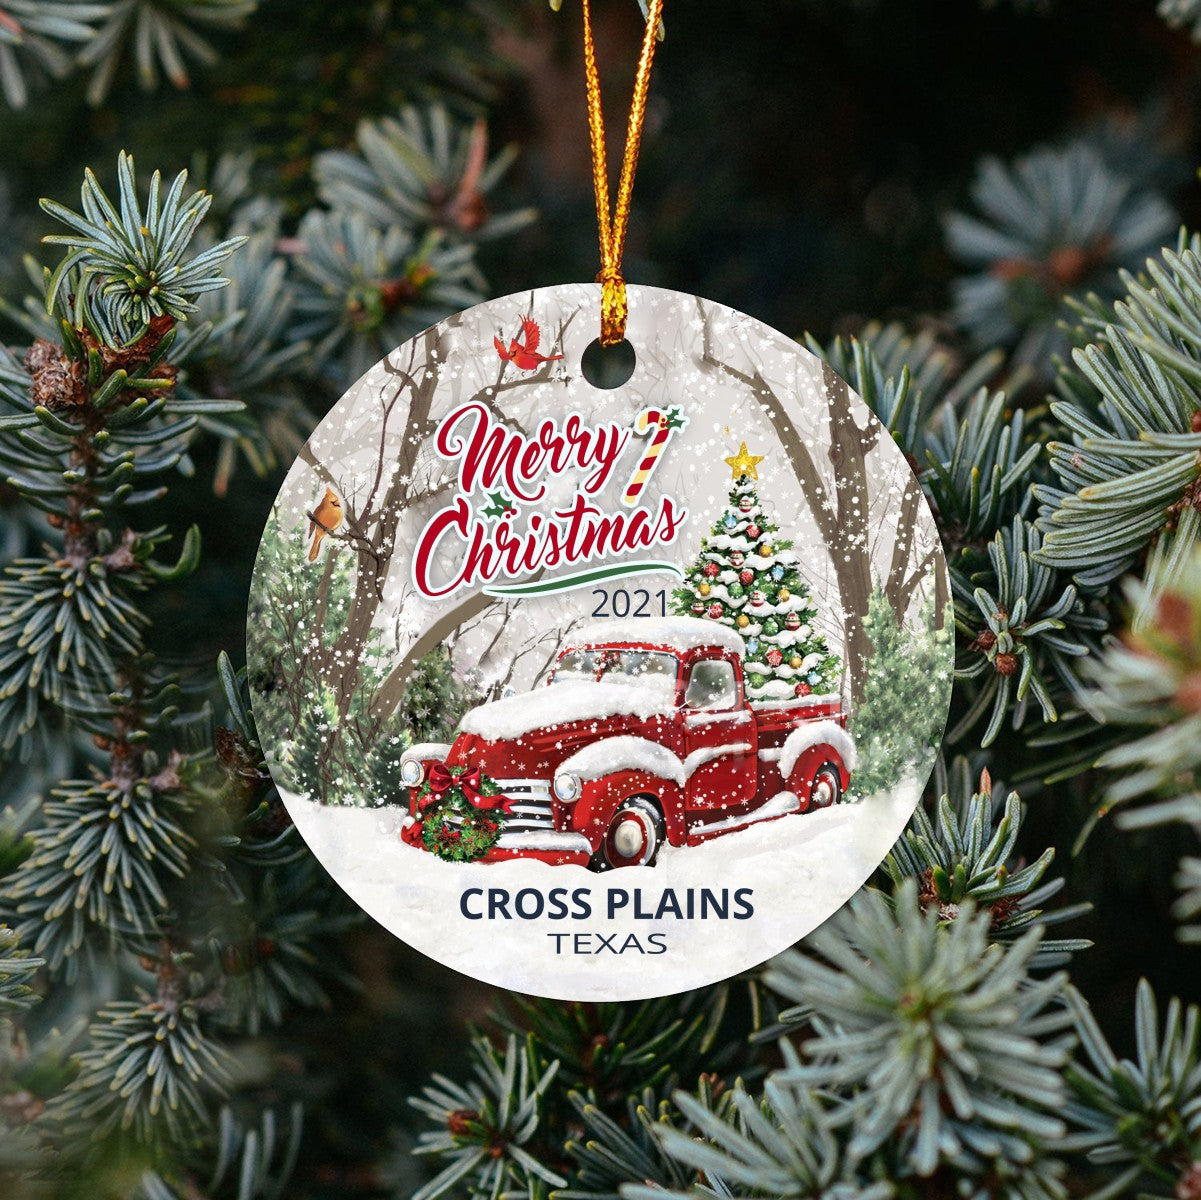 Christmas Tree Ornaments Cross Plains - Ornament With Name City, State Cross Plains Texas TX Ornament - Red Truck Xmas Ornaments 3'' Plastic Gift For Family, Friend And Housewarming